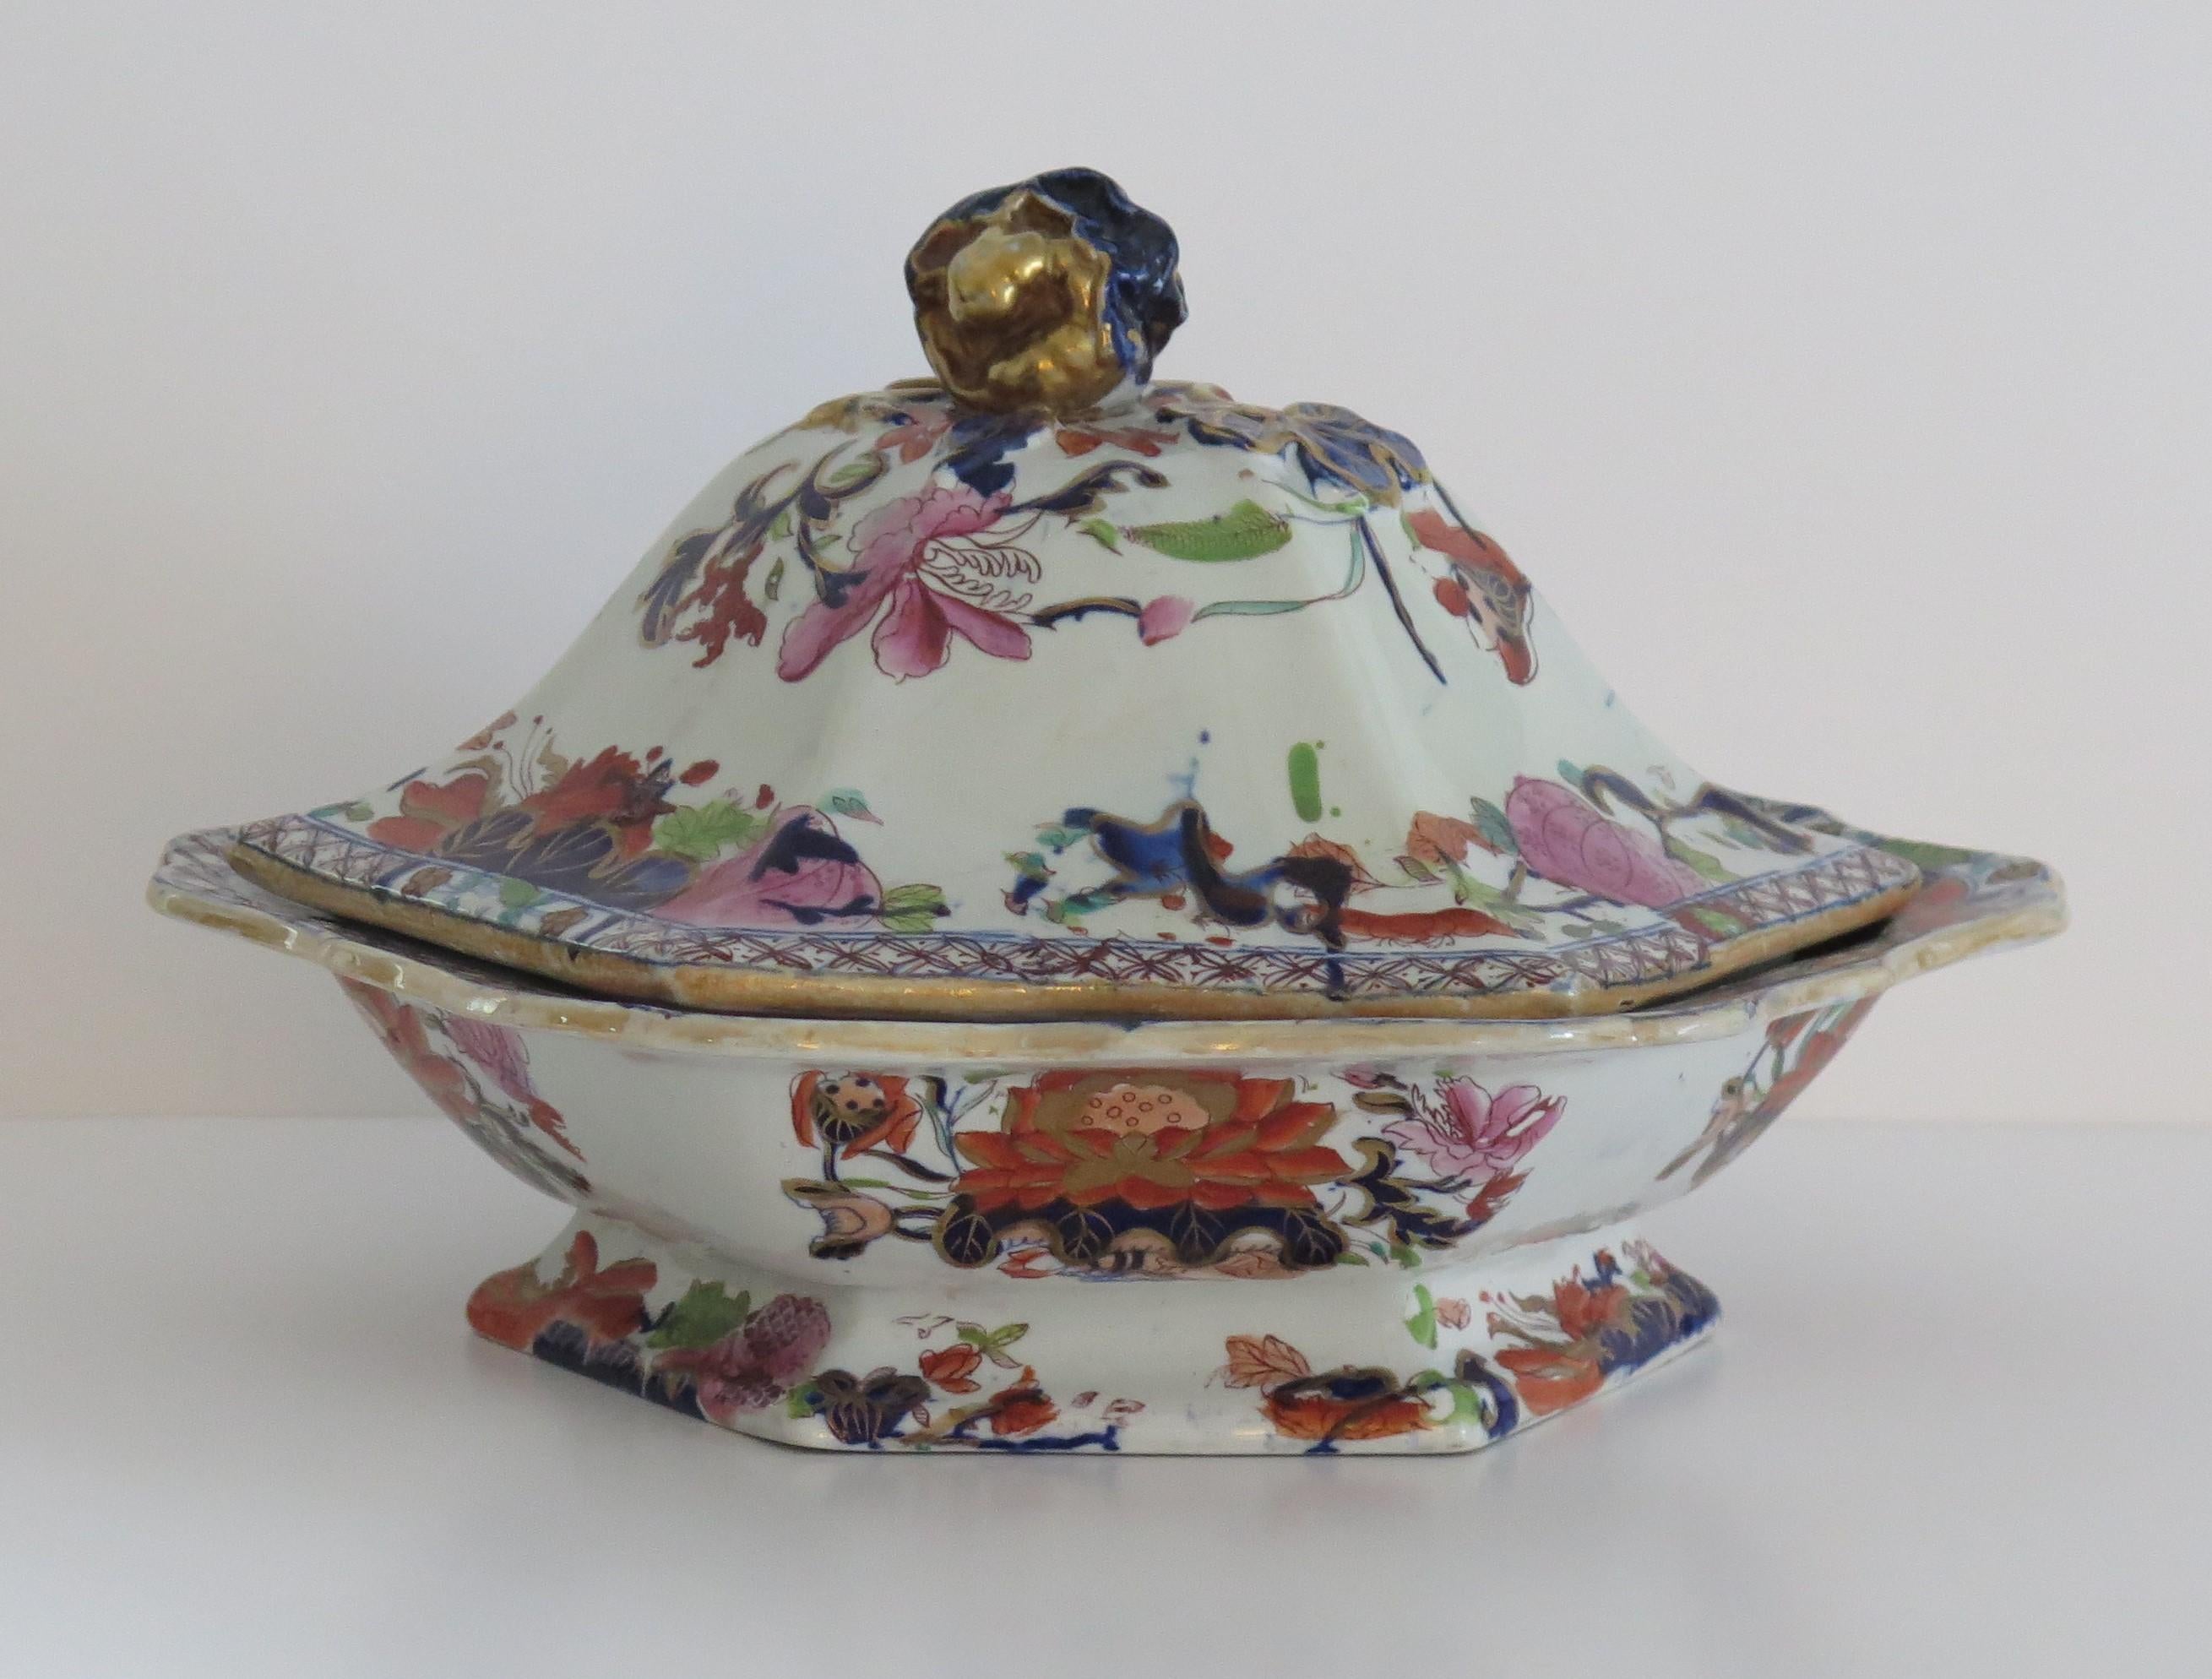 This is a superb large Ironstone Vegetable Tureen, complete with cover or lid , made by Mason's of Lane Delph, Staffordshire, England, during the early part of the 19th century, circa 1820.

This tureen is well potted and is hexagonal in shape with